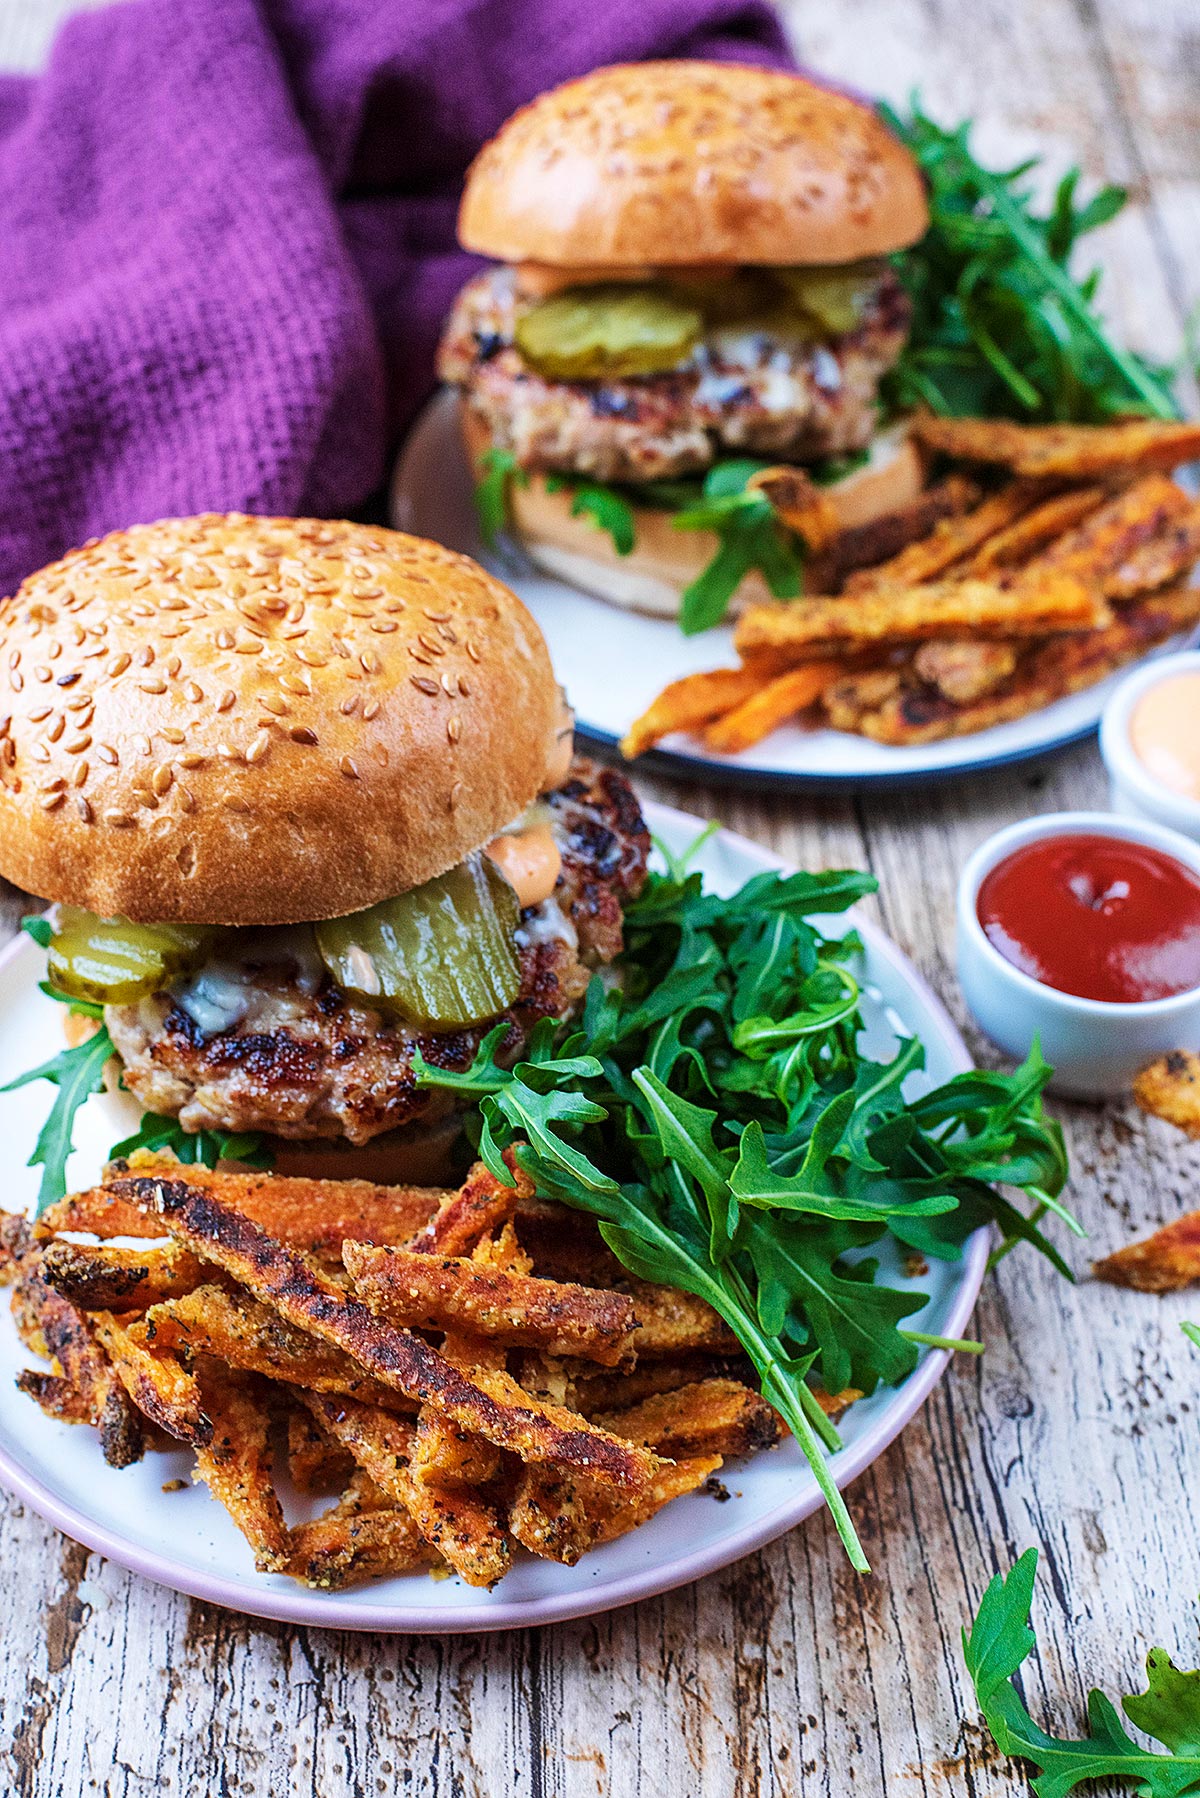 Two Pork and Apple Burgers with sweet potato fries and salad